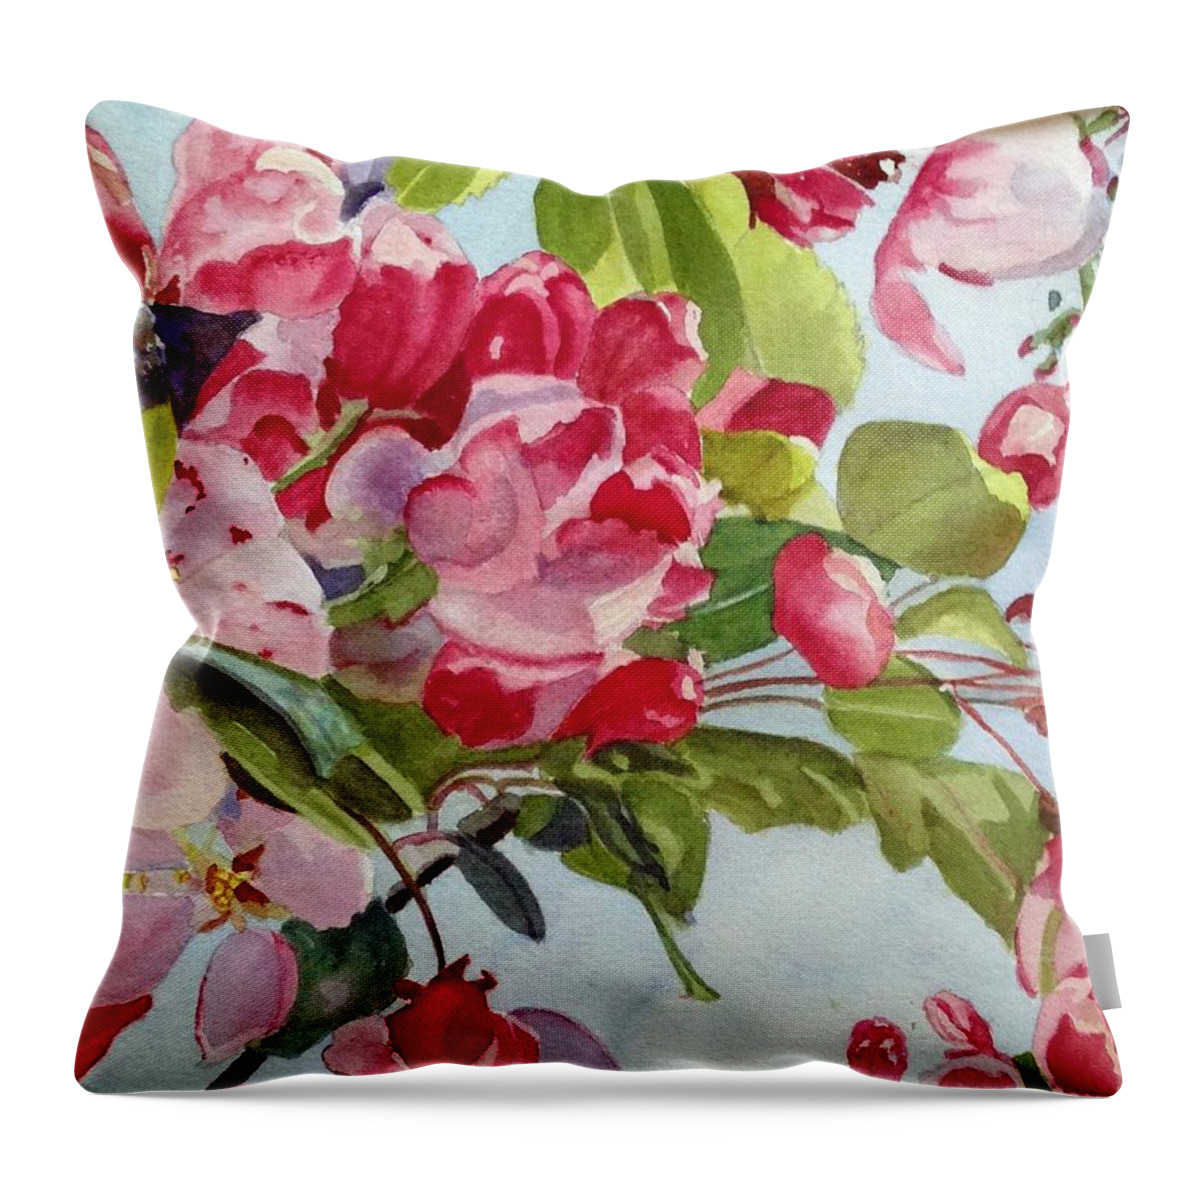 Dappled Throw Pillow featuring the painting Dappled by Nicole Curreri